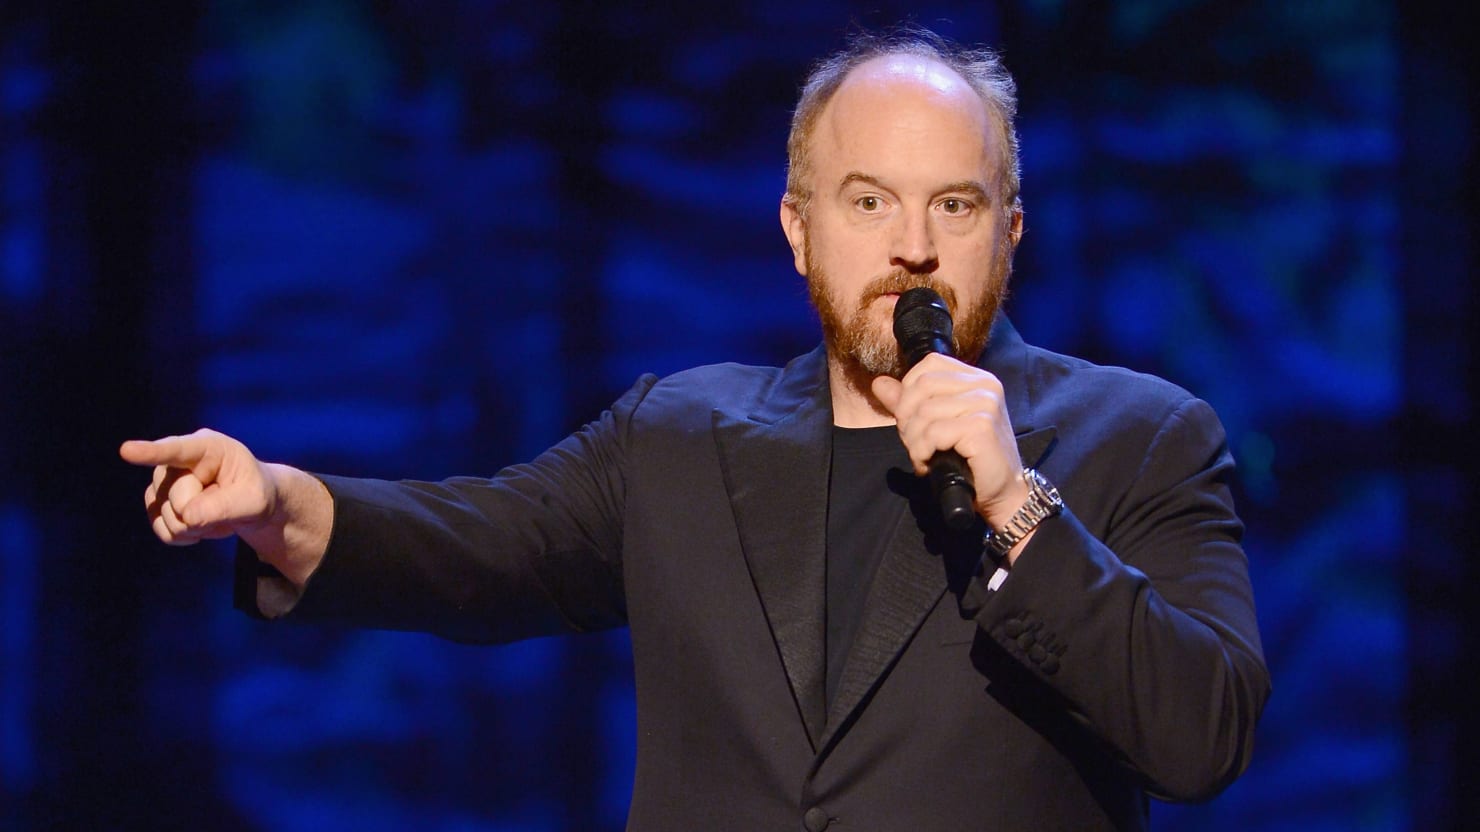 Louis C.K. Is Going on a Big ‘Comeback’ Tour. He Hasn’t Earned His Forgiveness.